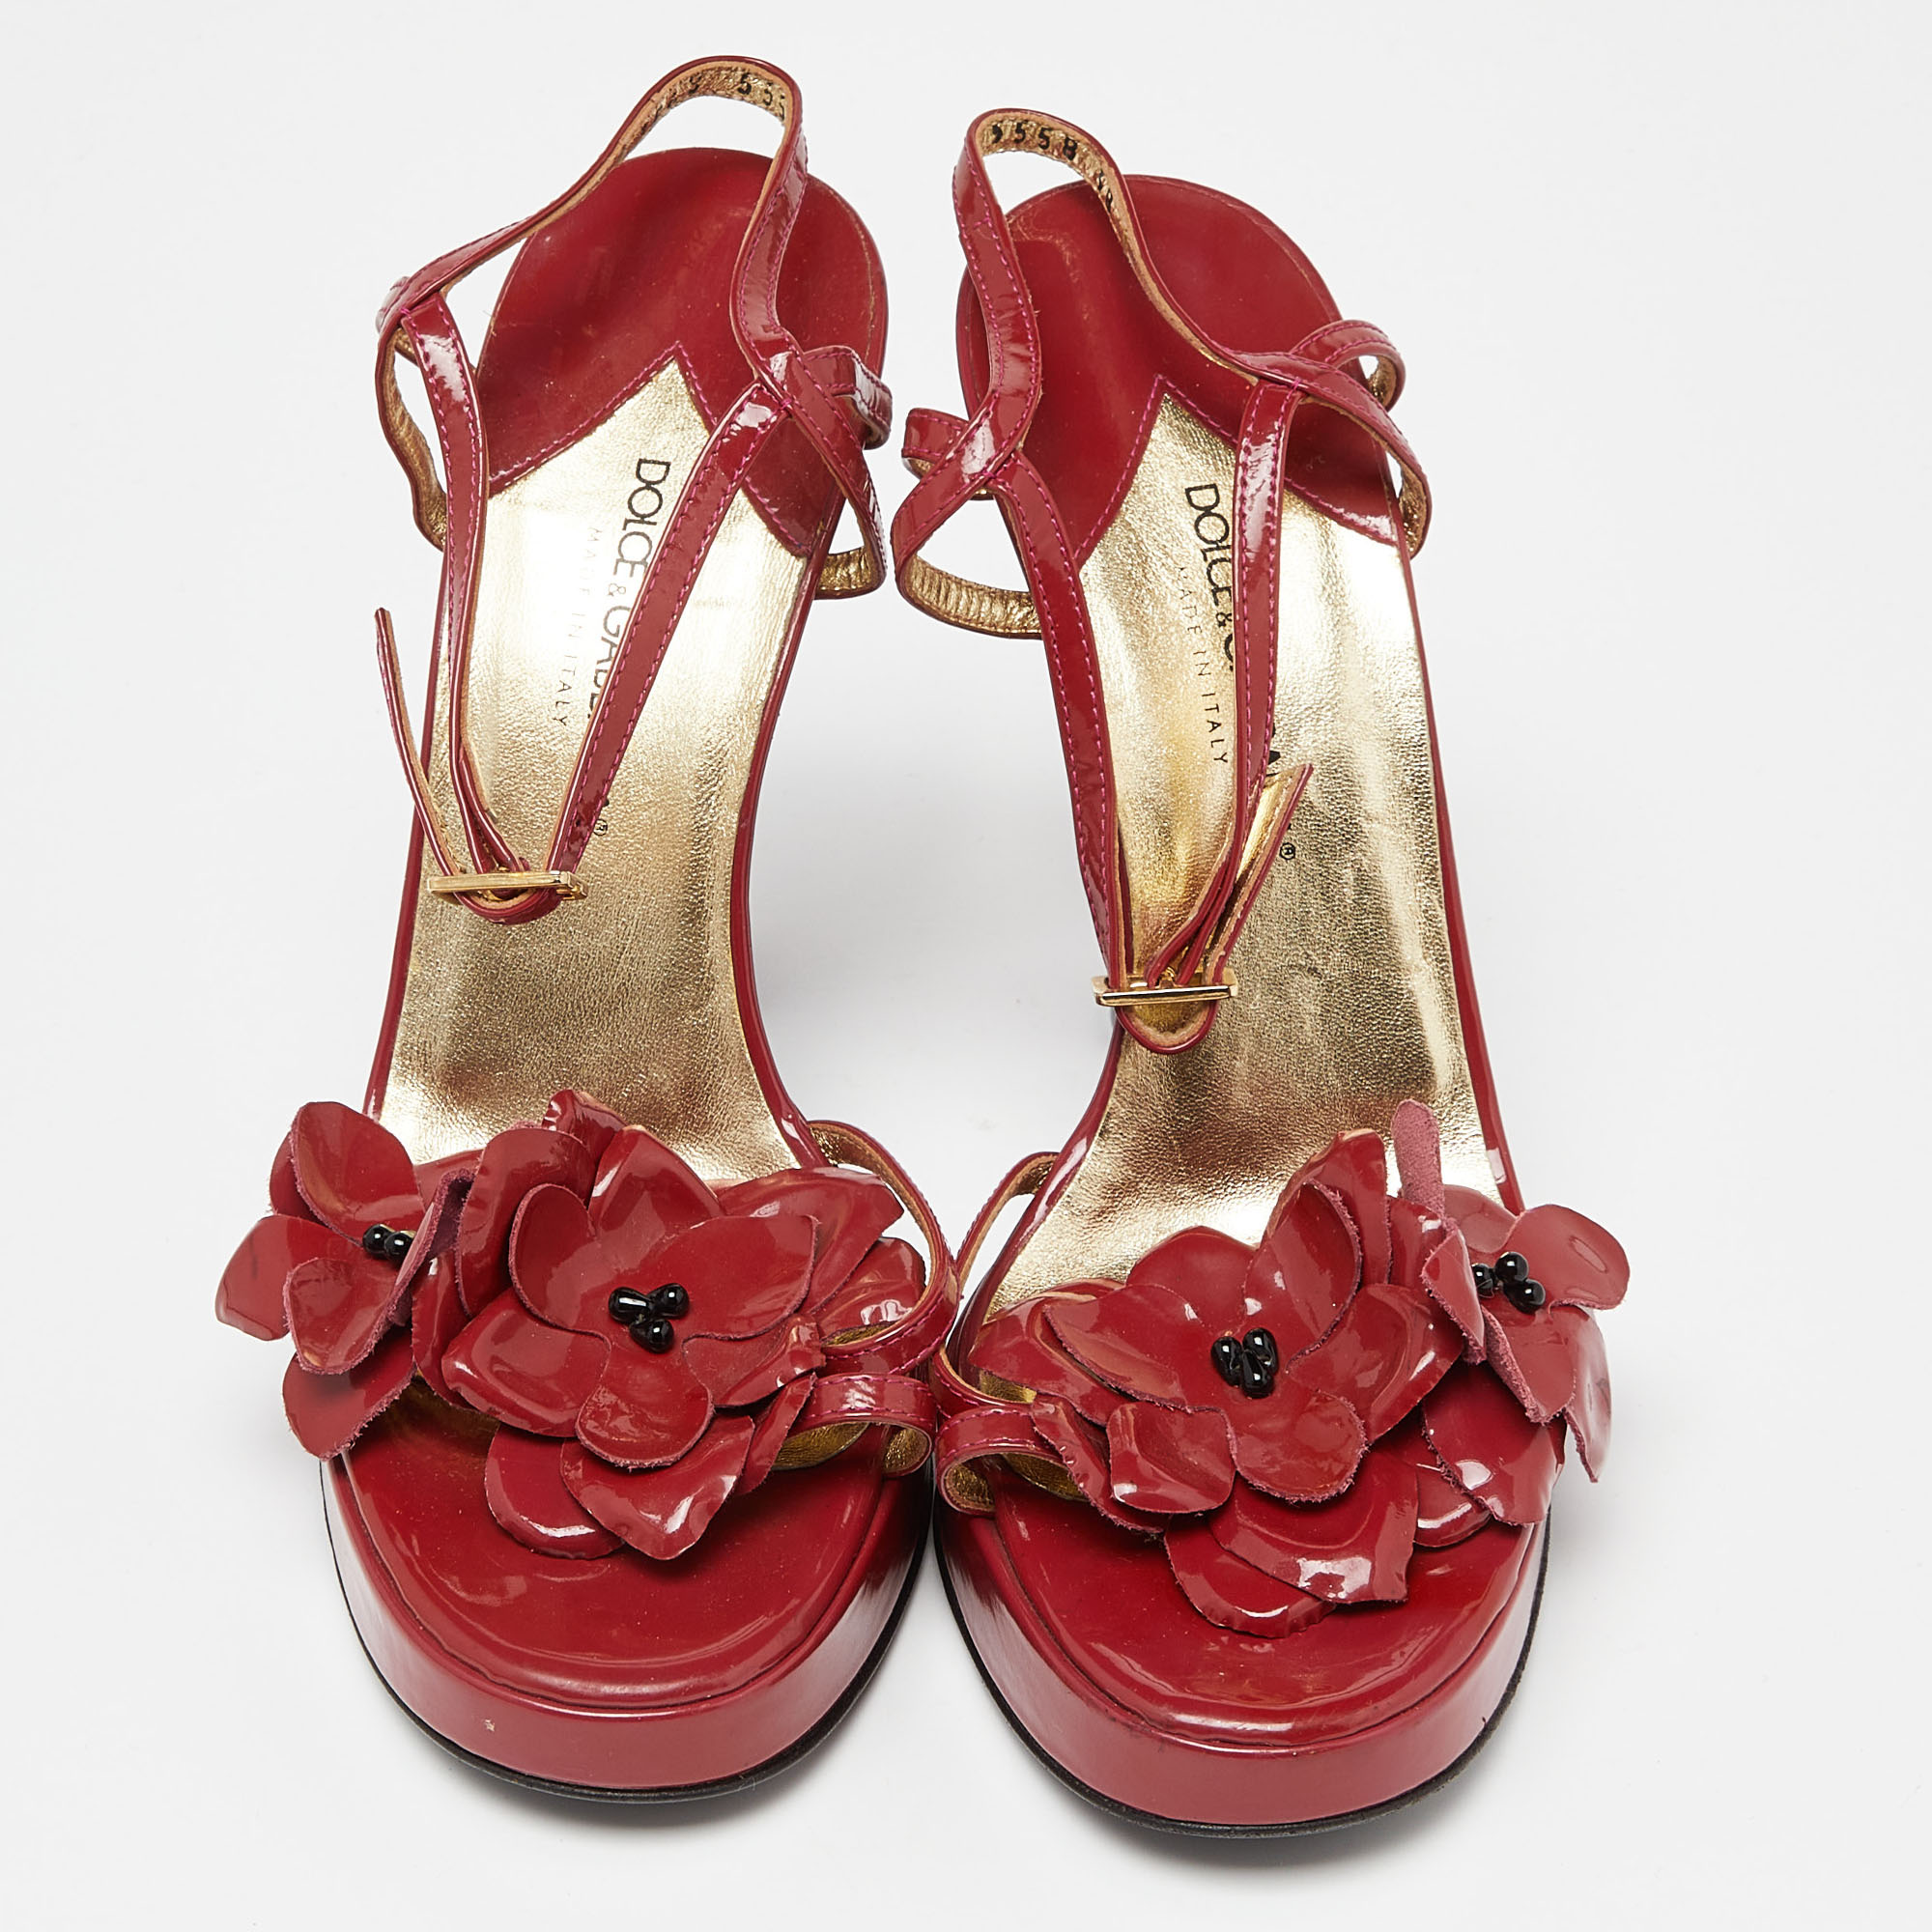 Dolce & Gabbana Red Patent Leather Flower Strappy Sandals Size 38